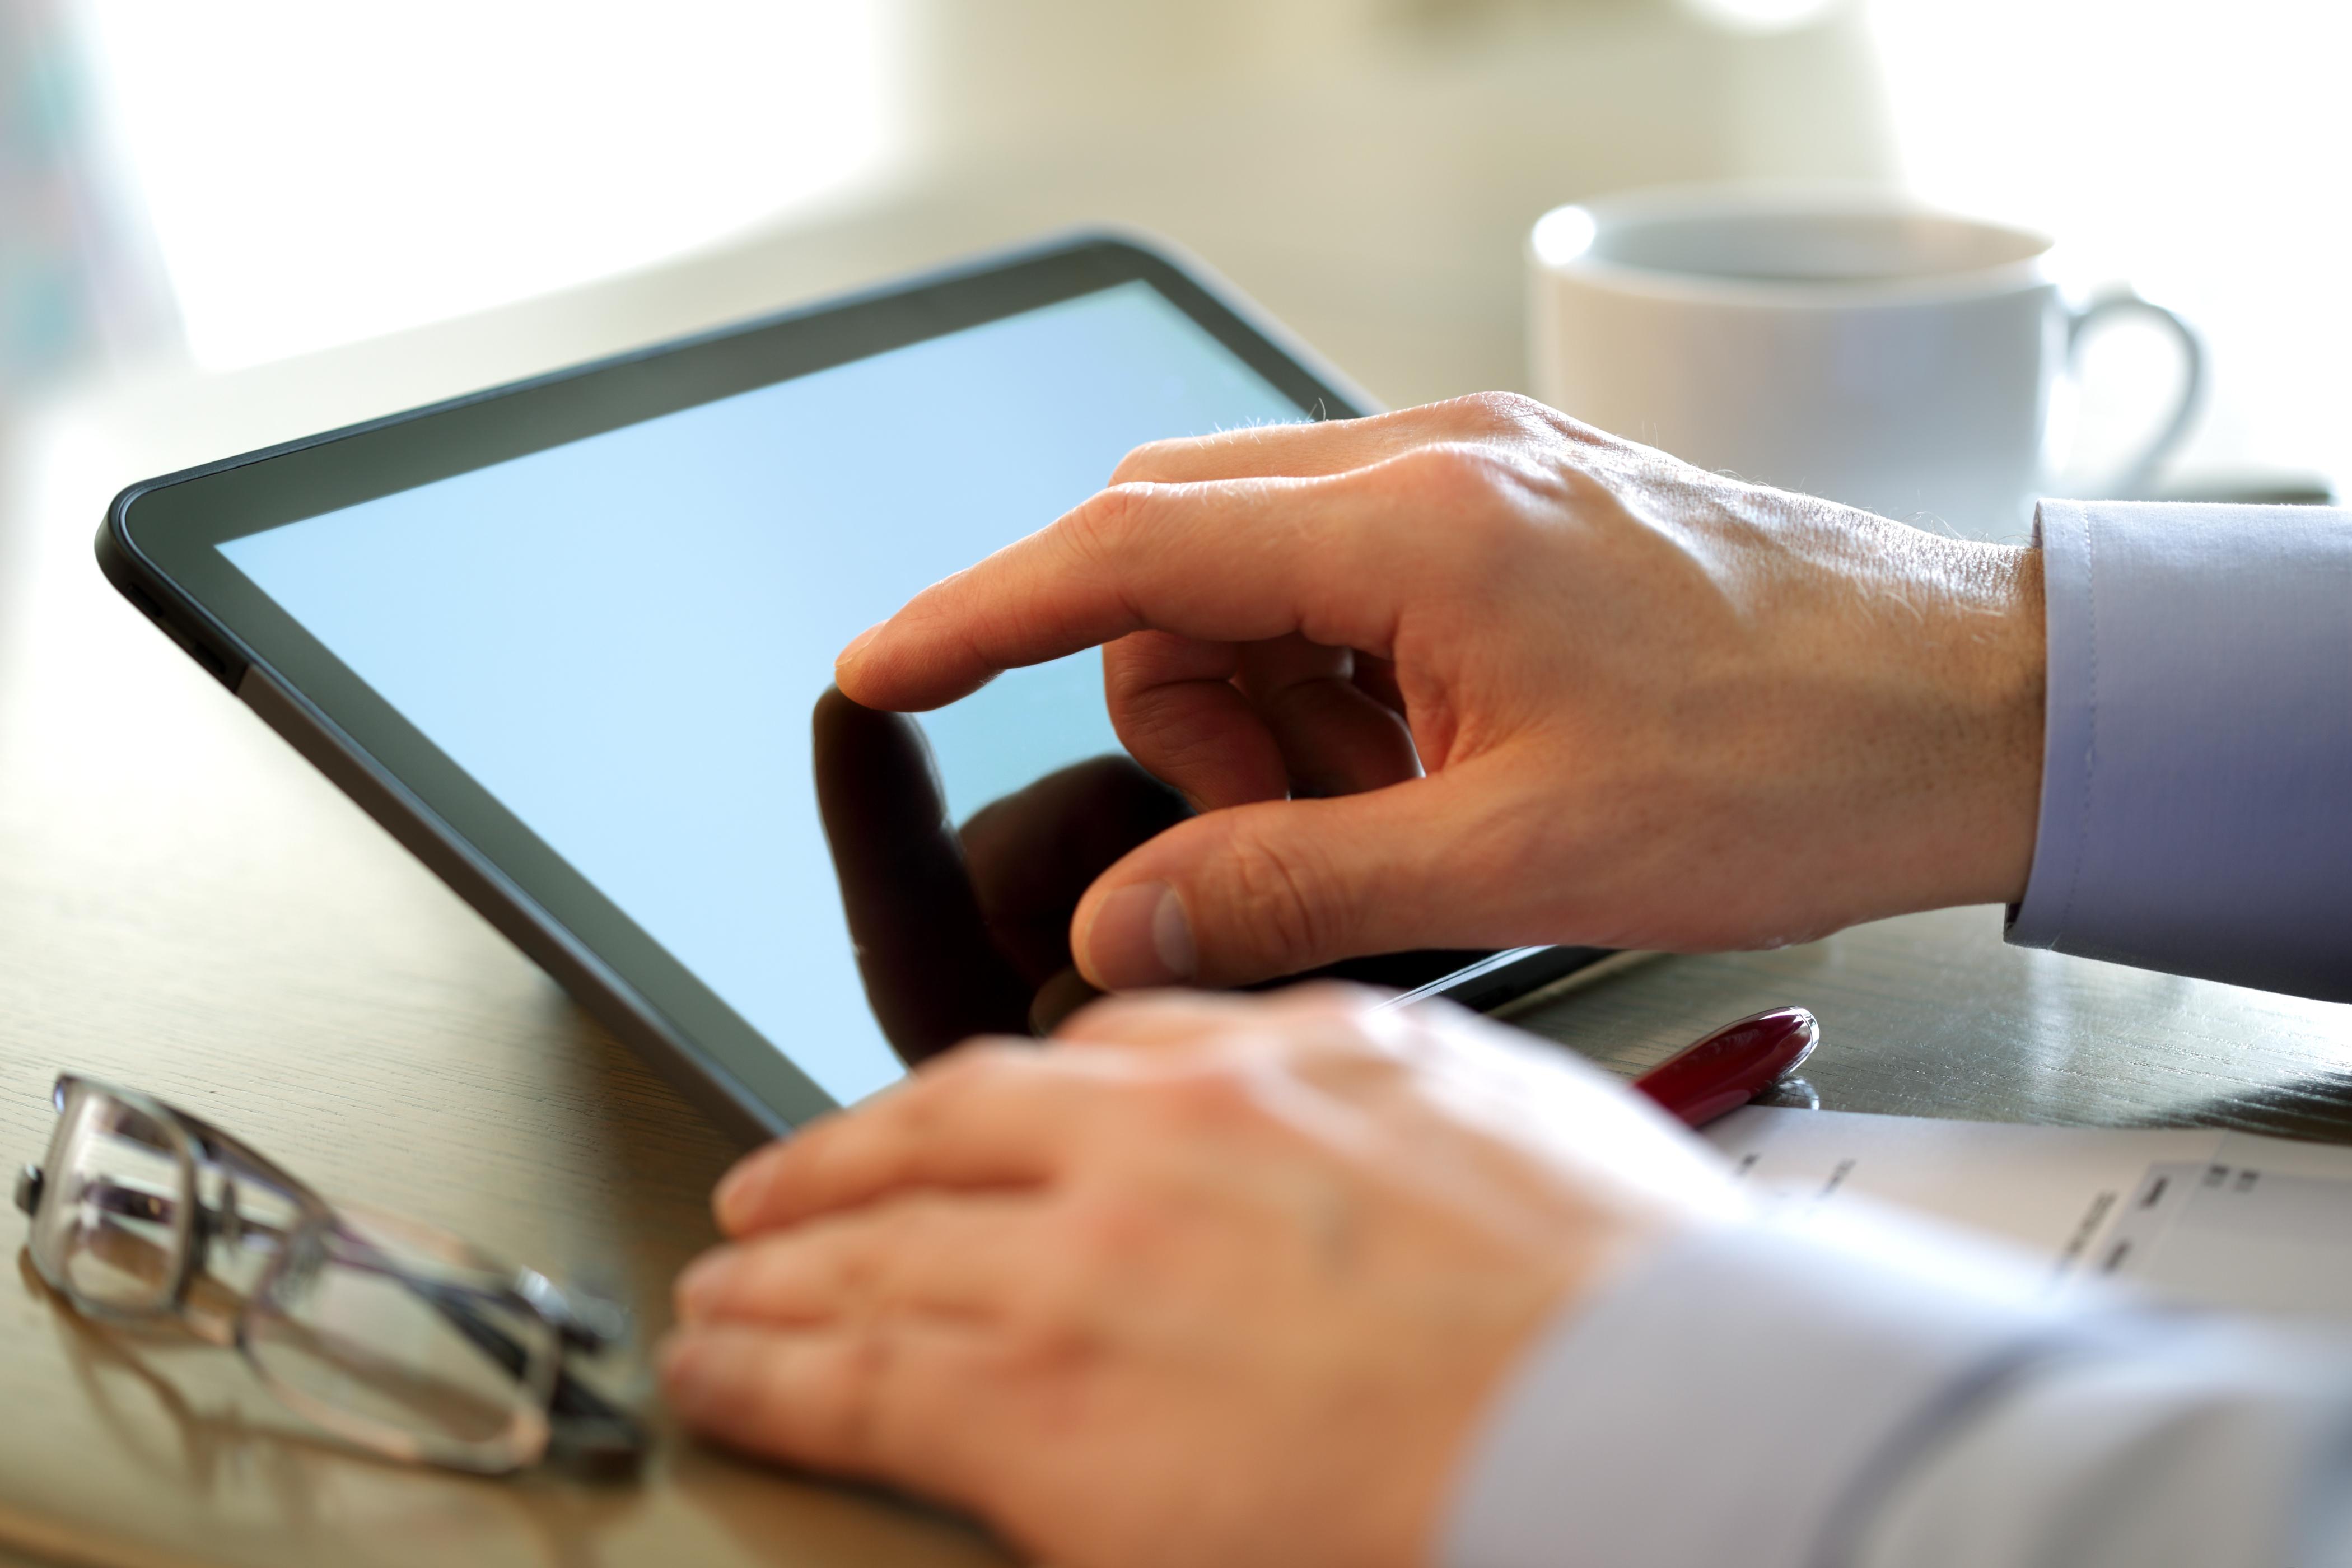 Businessman using a tablet